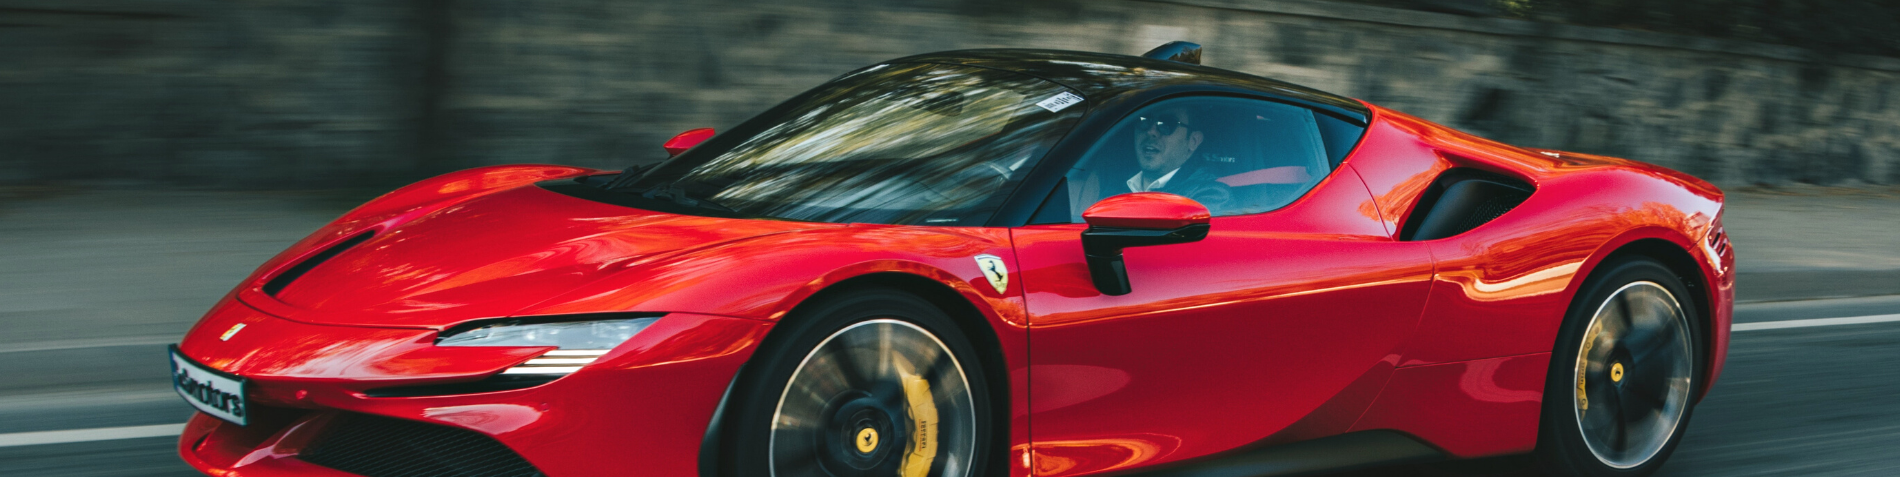 11 Tips for Maintaining and Protecting Your Ferrari